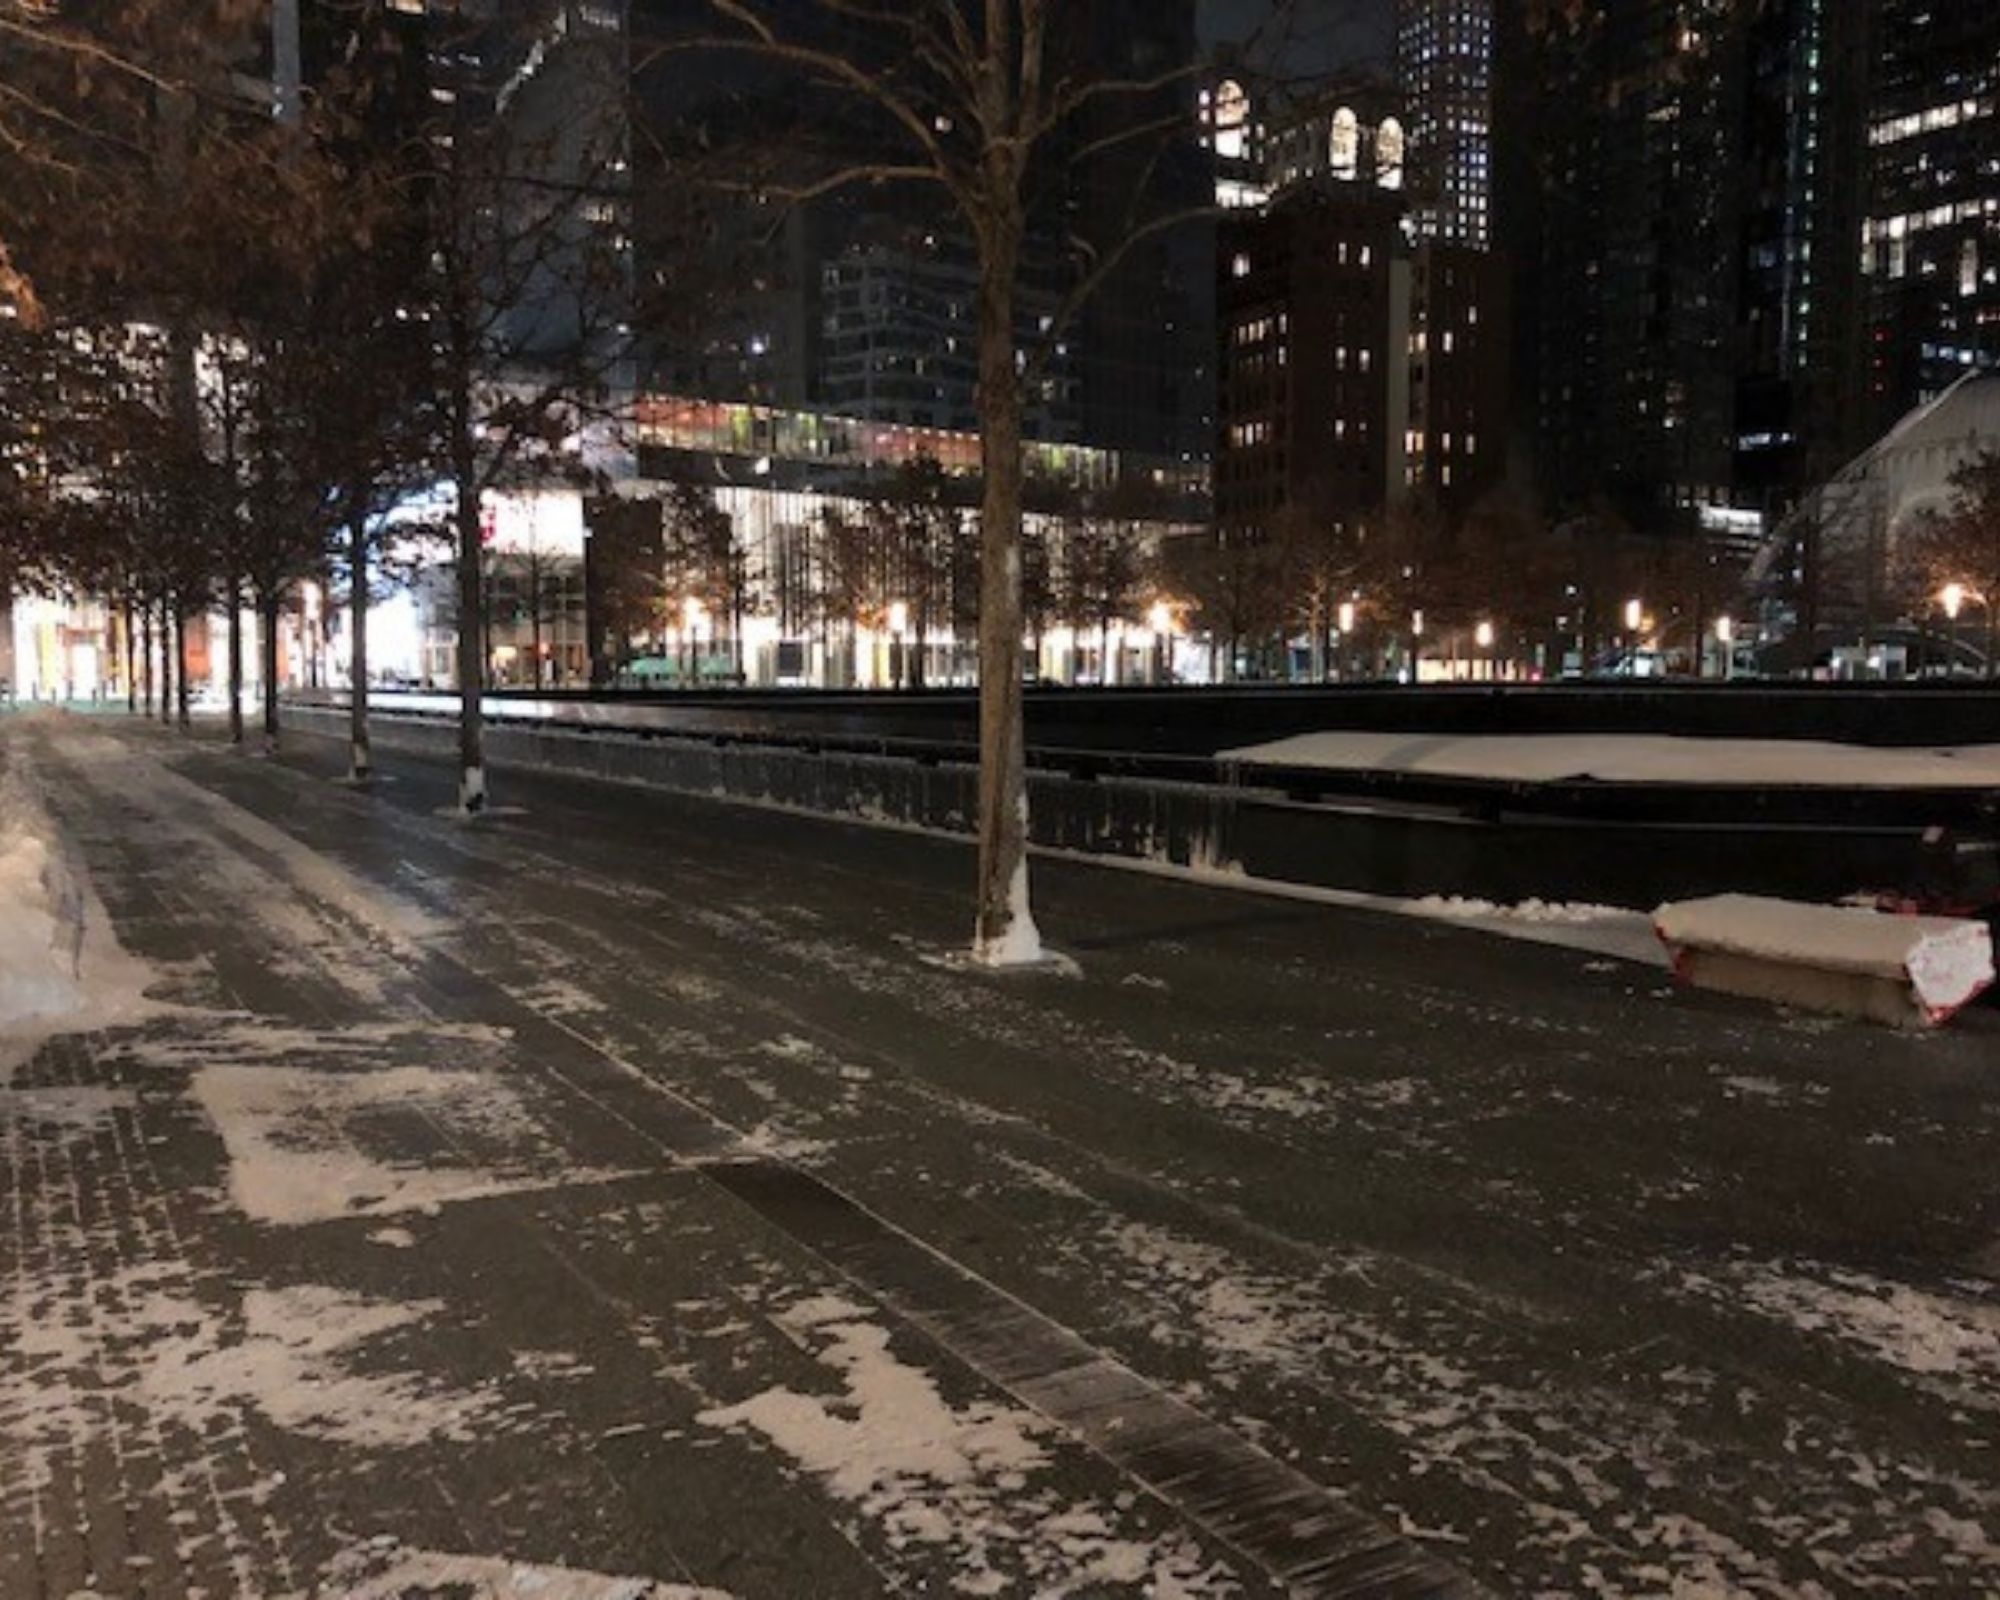 Nighttime on the plaza, with snow cleared away